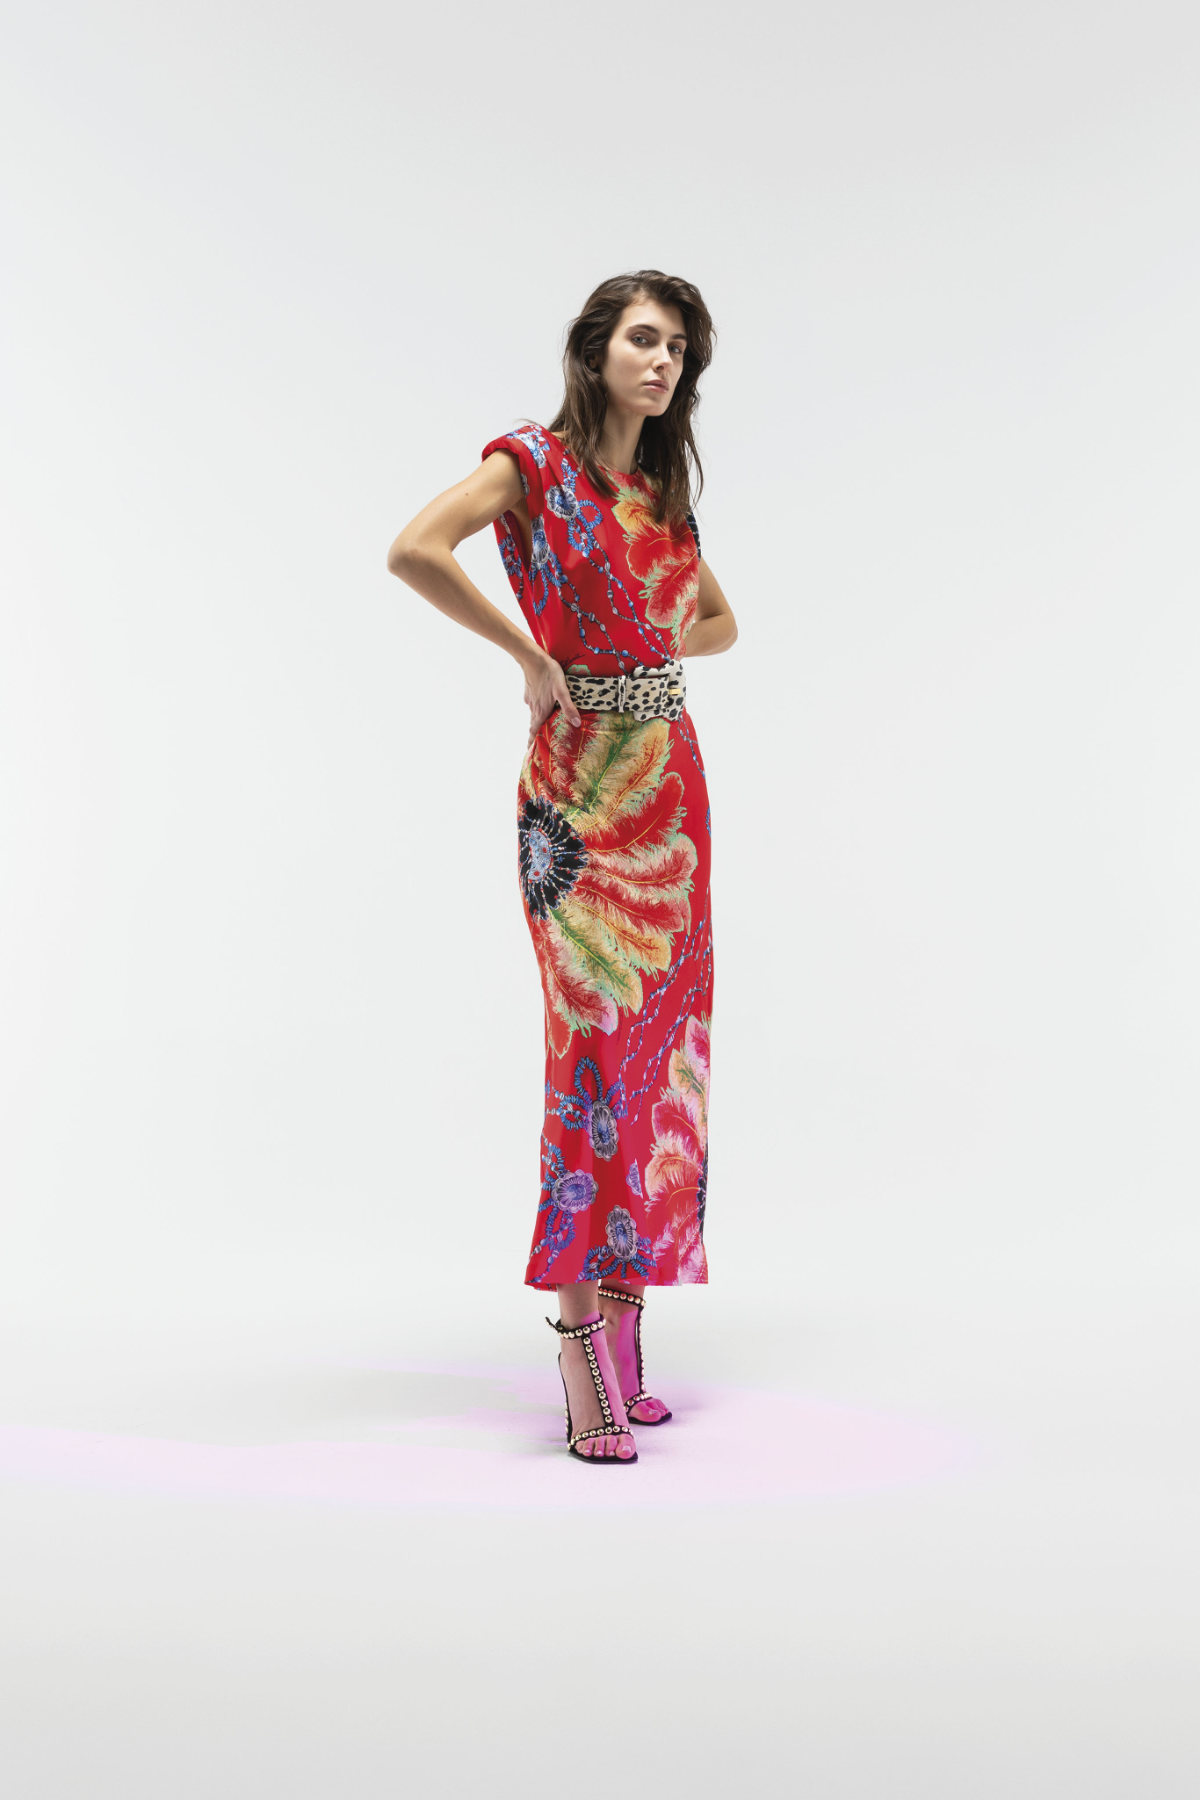 Just Cavalli Presents Its New Pre-Fall Collection 22 Womenswear And Menswear